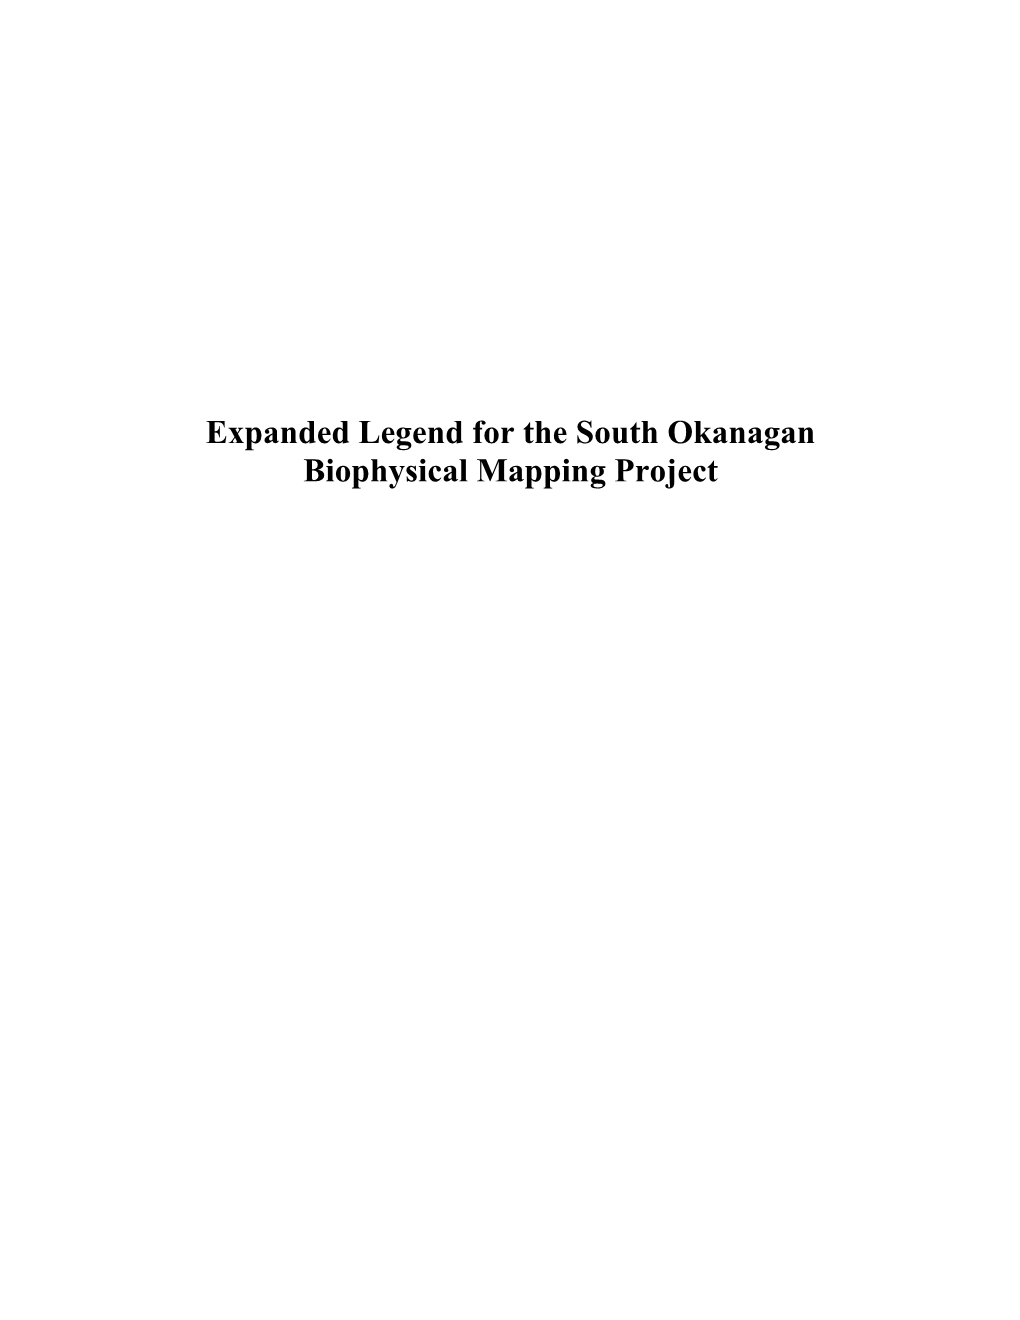 Expanded Legend for the South Okanagan Biophysical Mapping Project